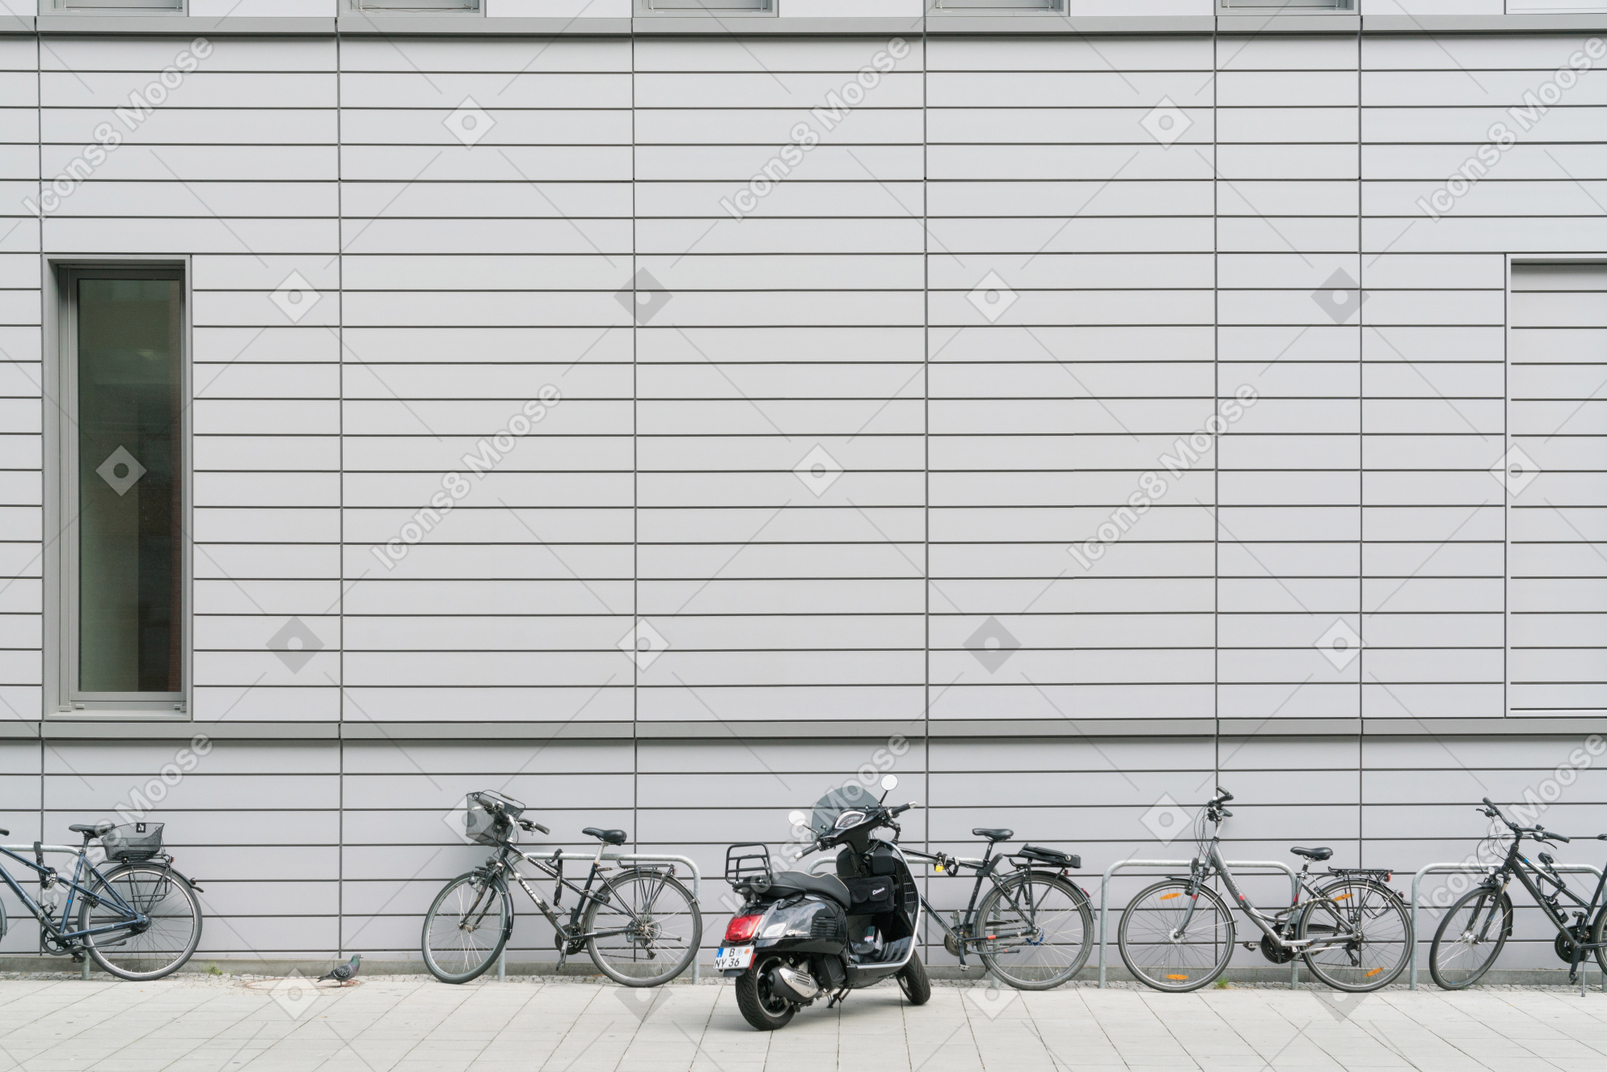 Bicycles and scooter parked in front of building